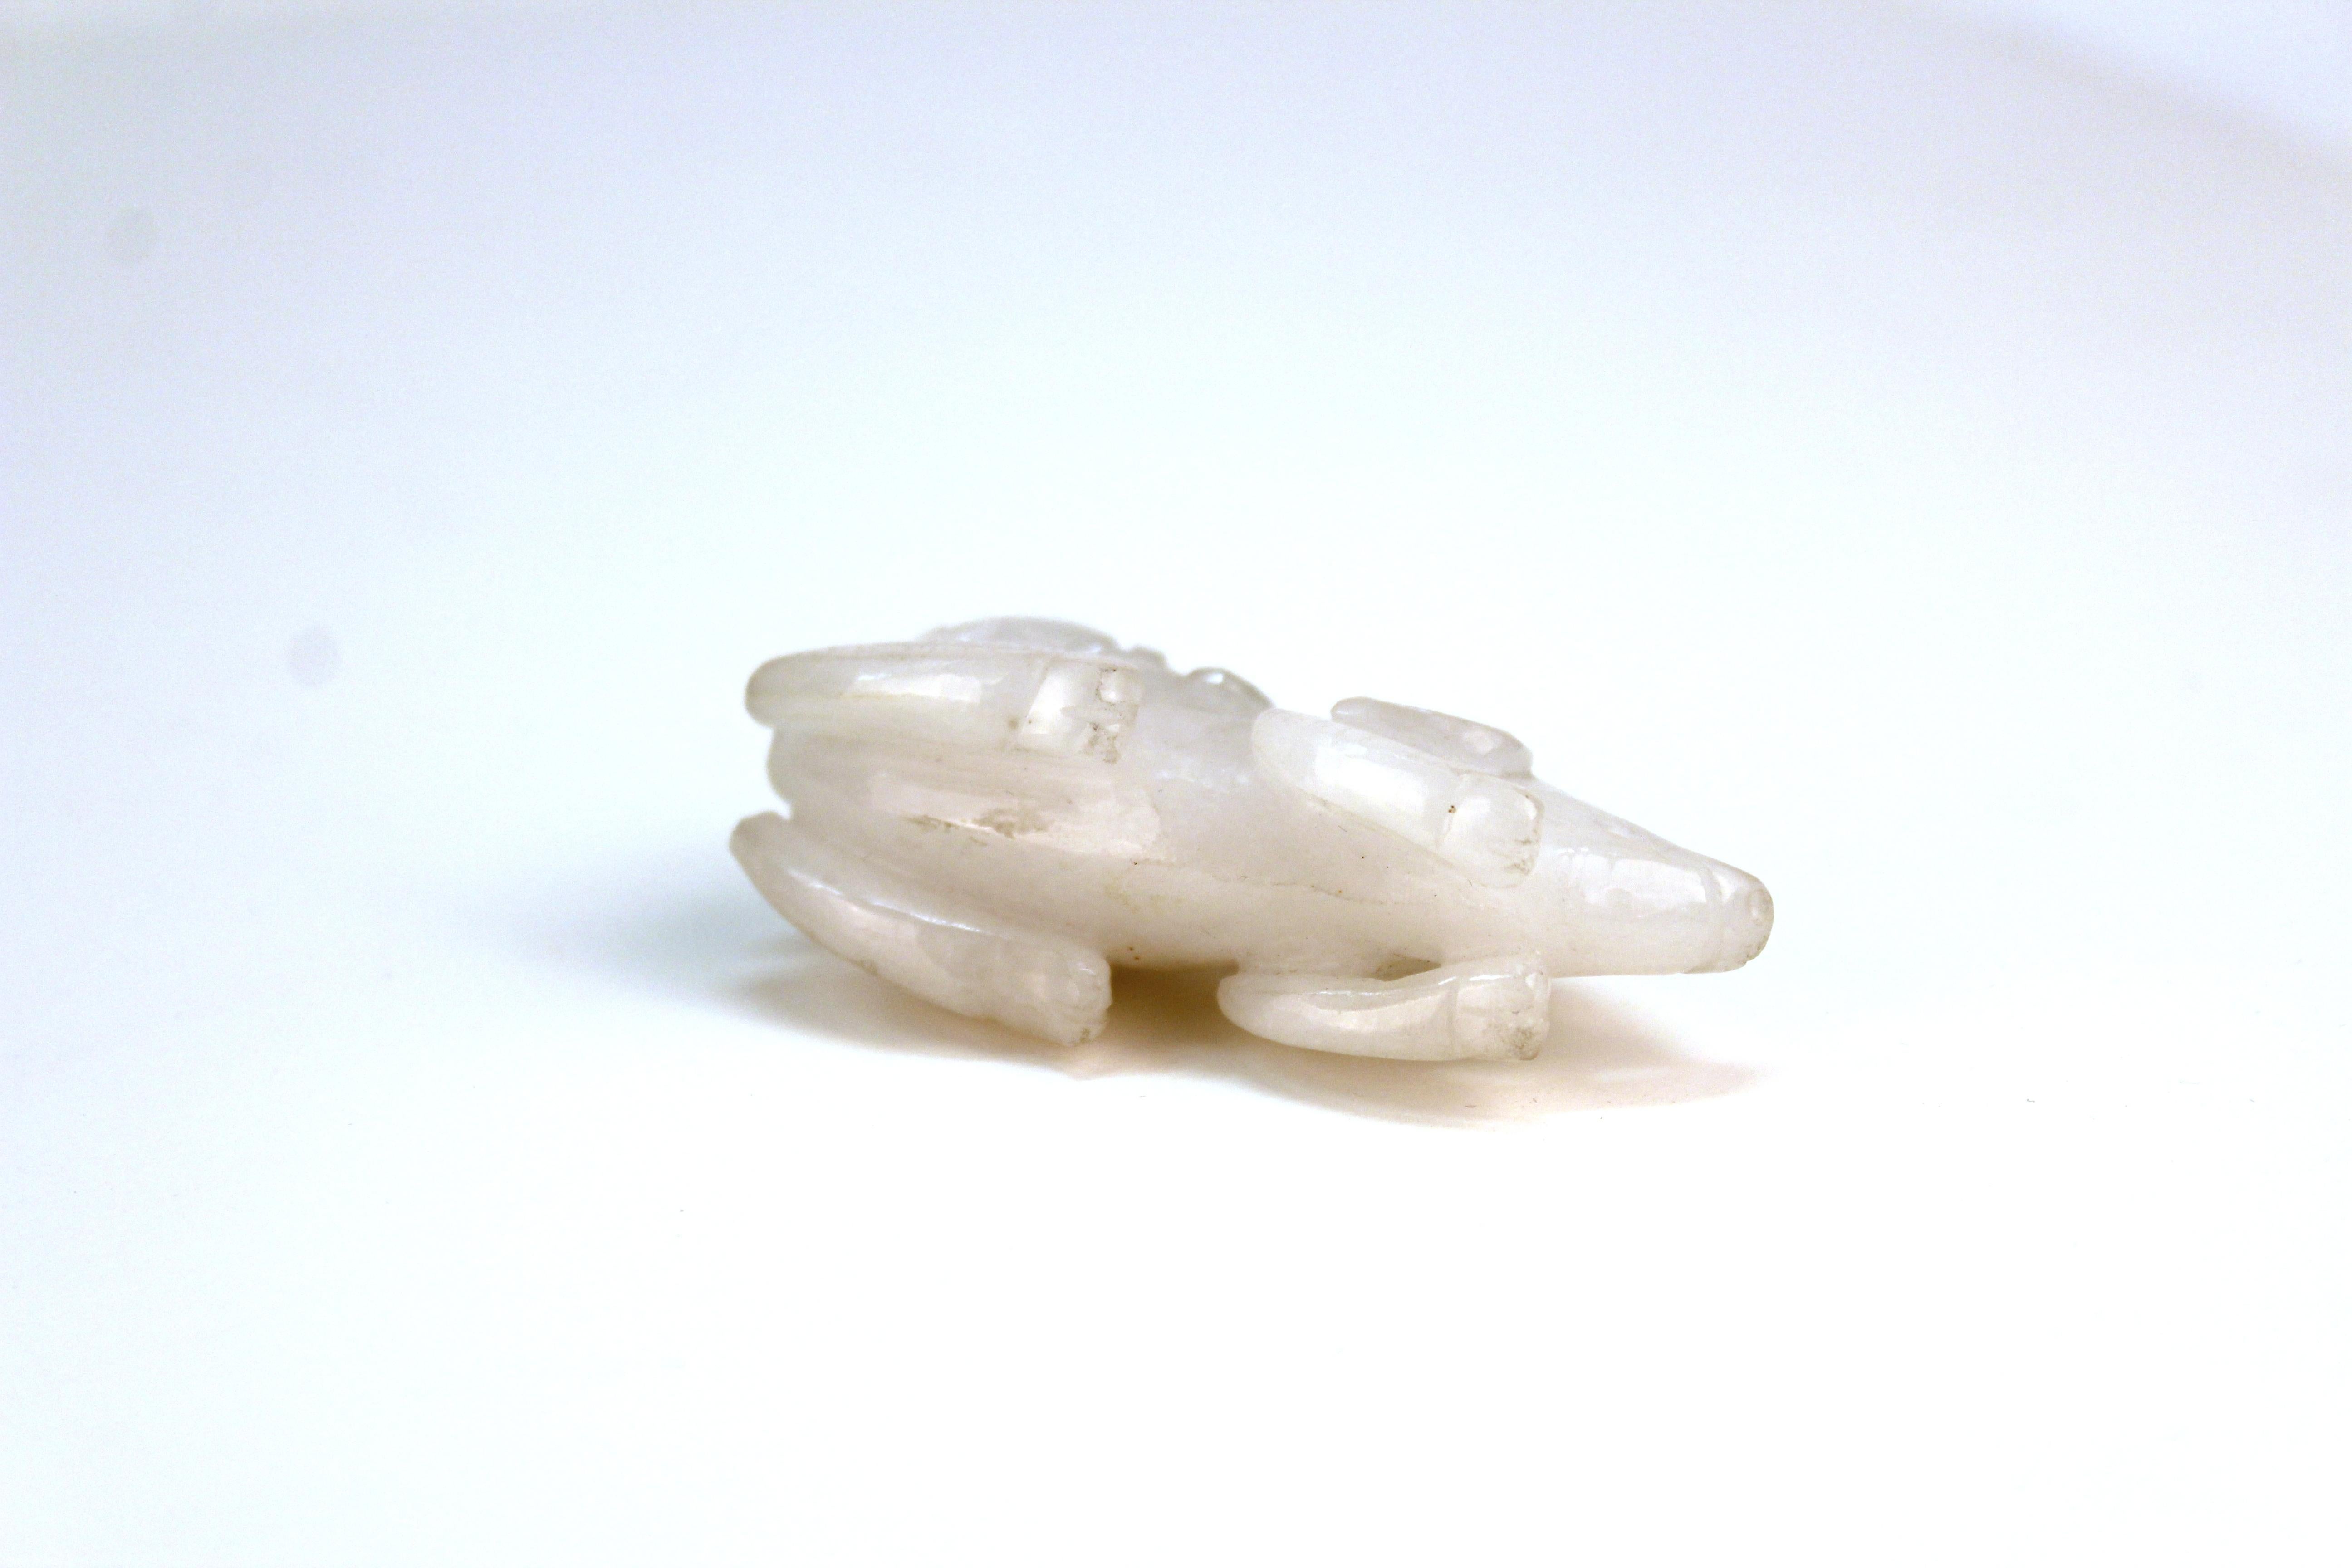 Chinese White Jadeite Sculpture of a Small Pig with Bat 1